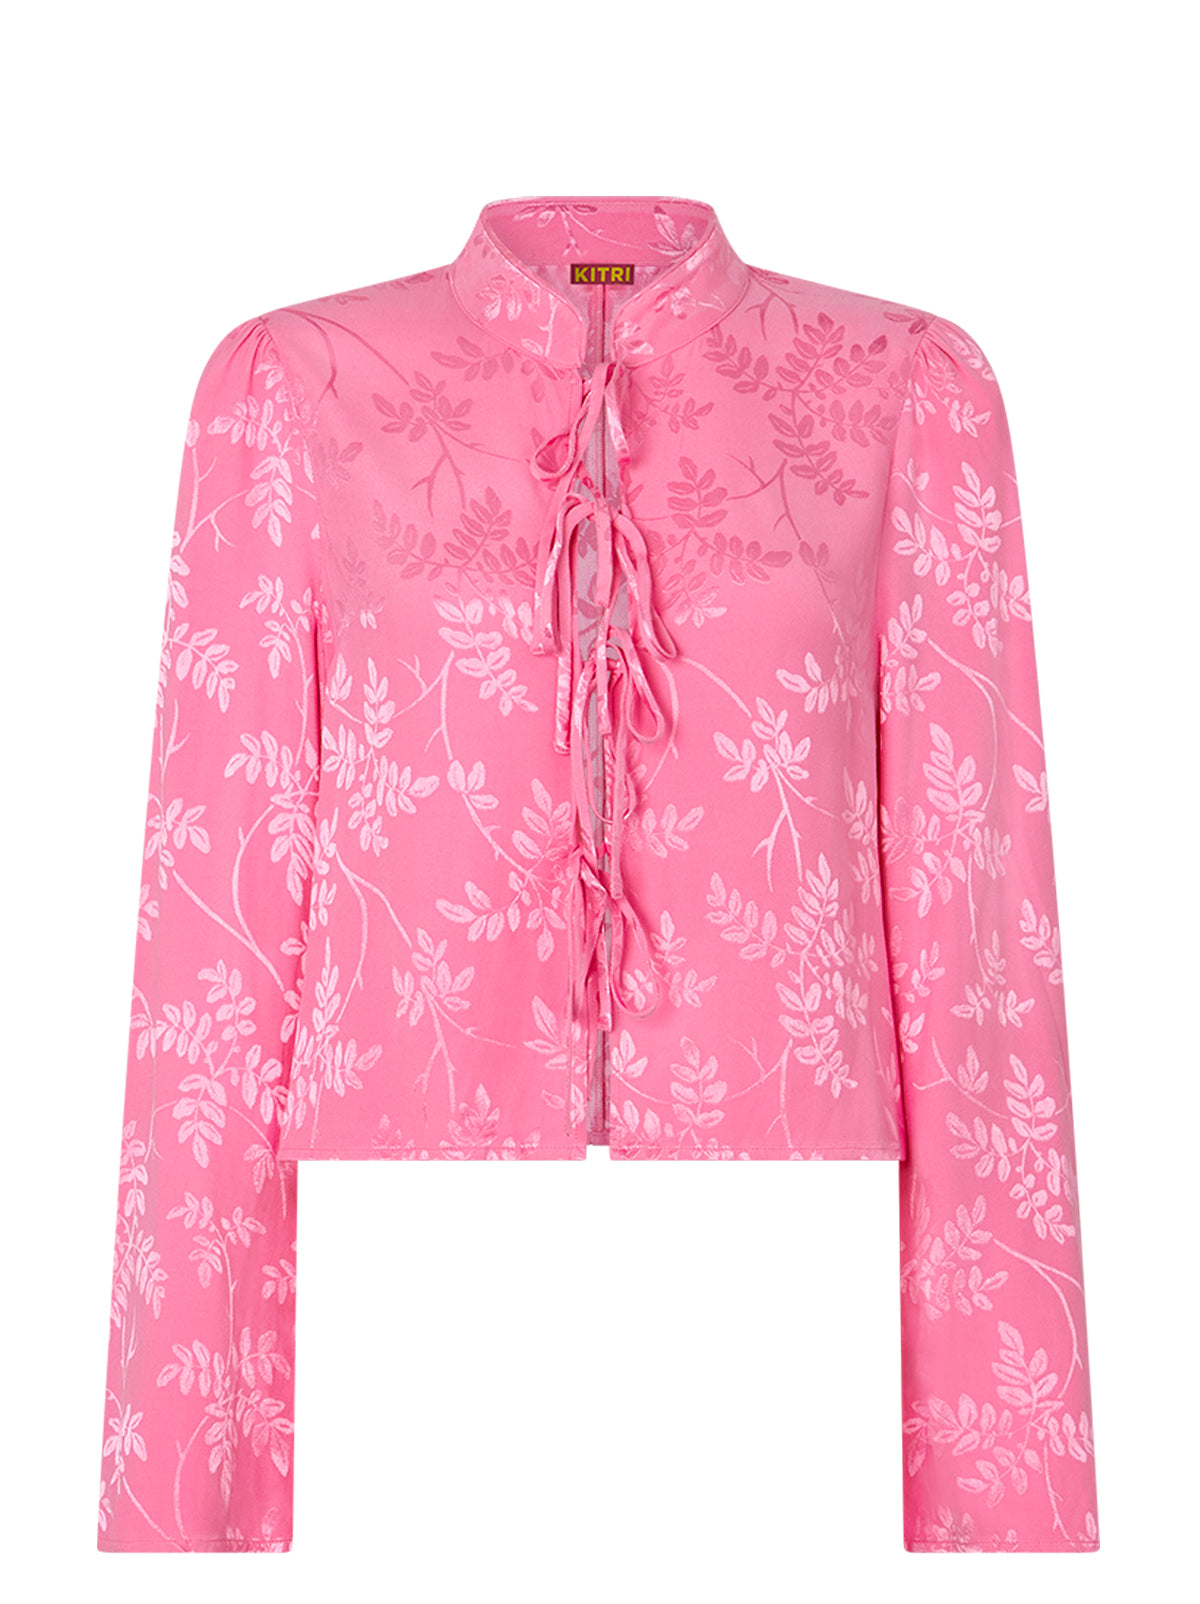 Cecily Pink Floral Jacquard Top By KITRI Studio